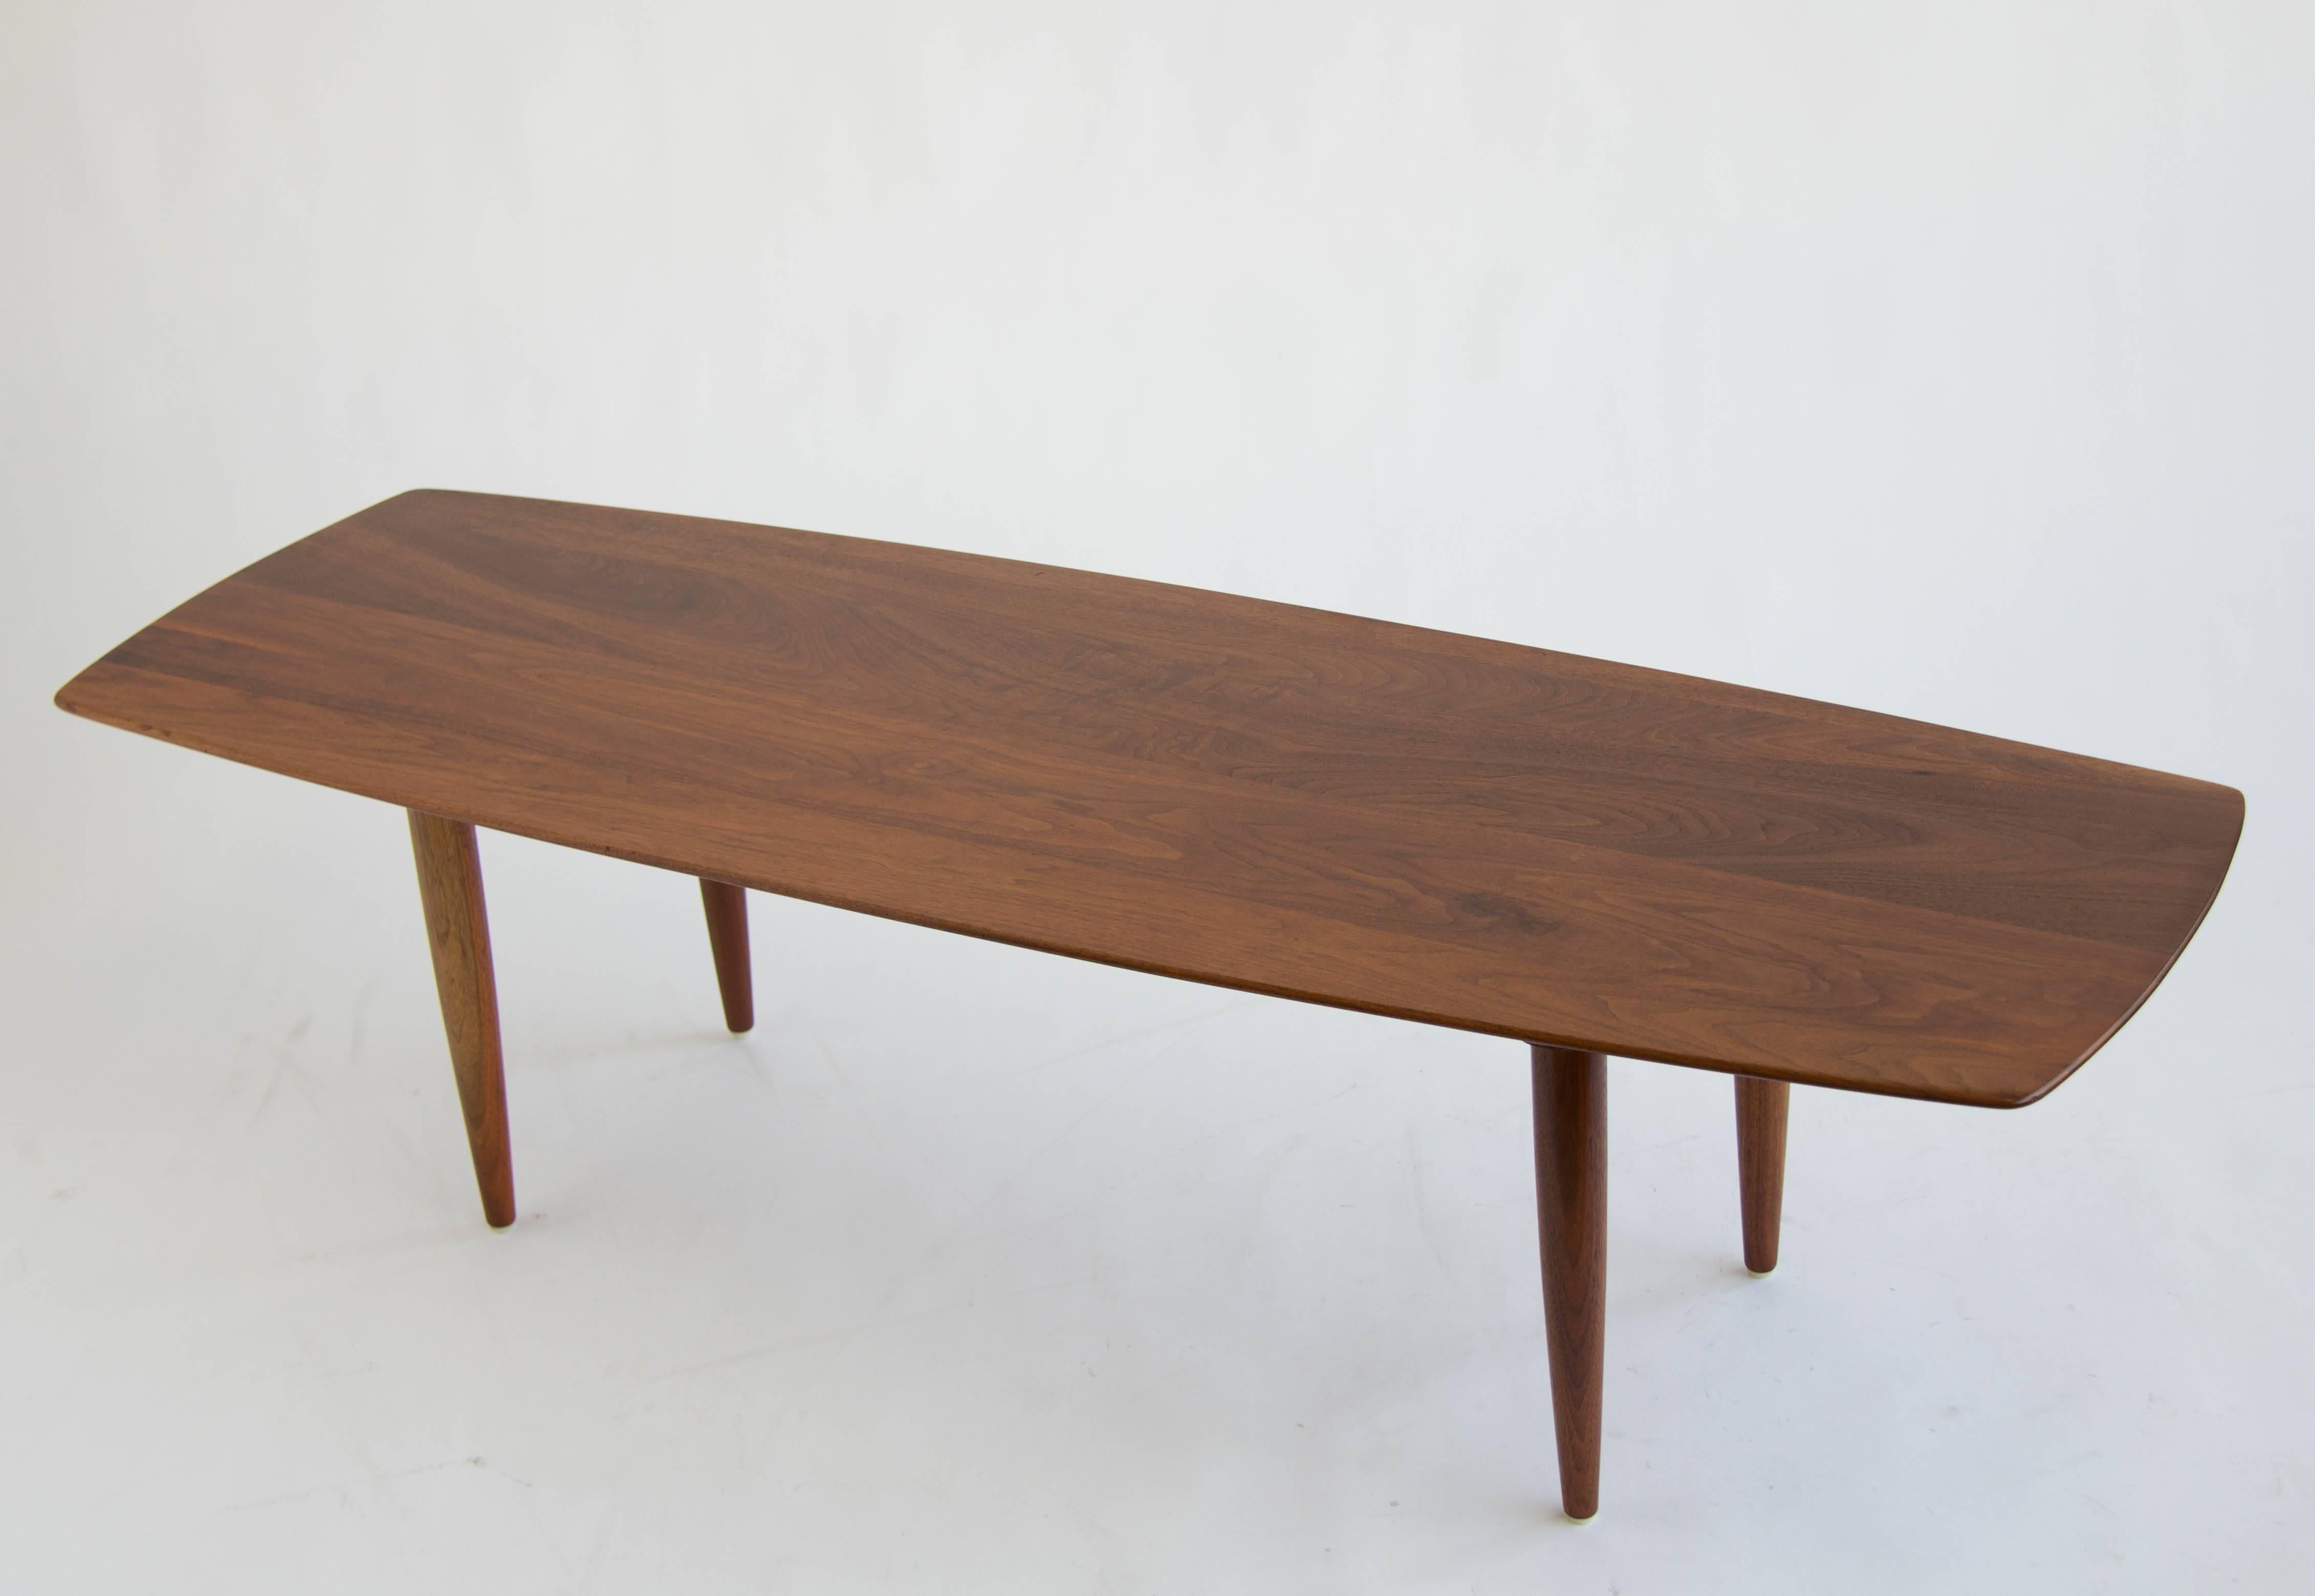 Solid walnut coffee table made by California based furniture maker Prelude. Stamped 